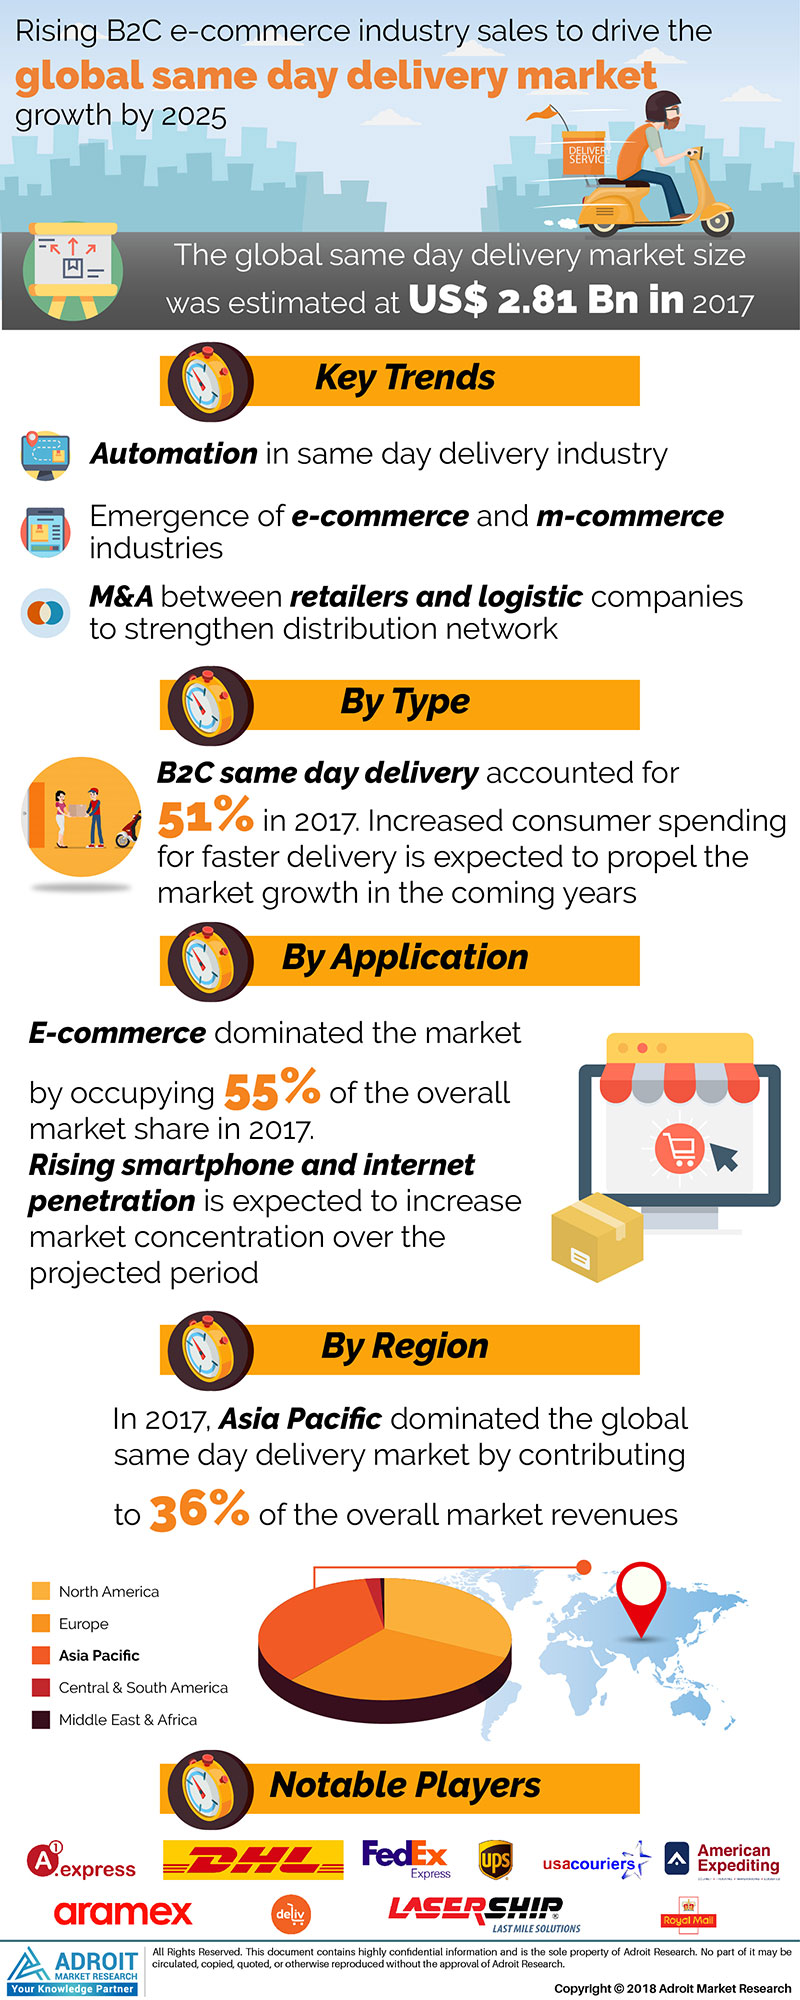 Global Same Day Delivery Market Size, Growth, Trends 2025'